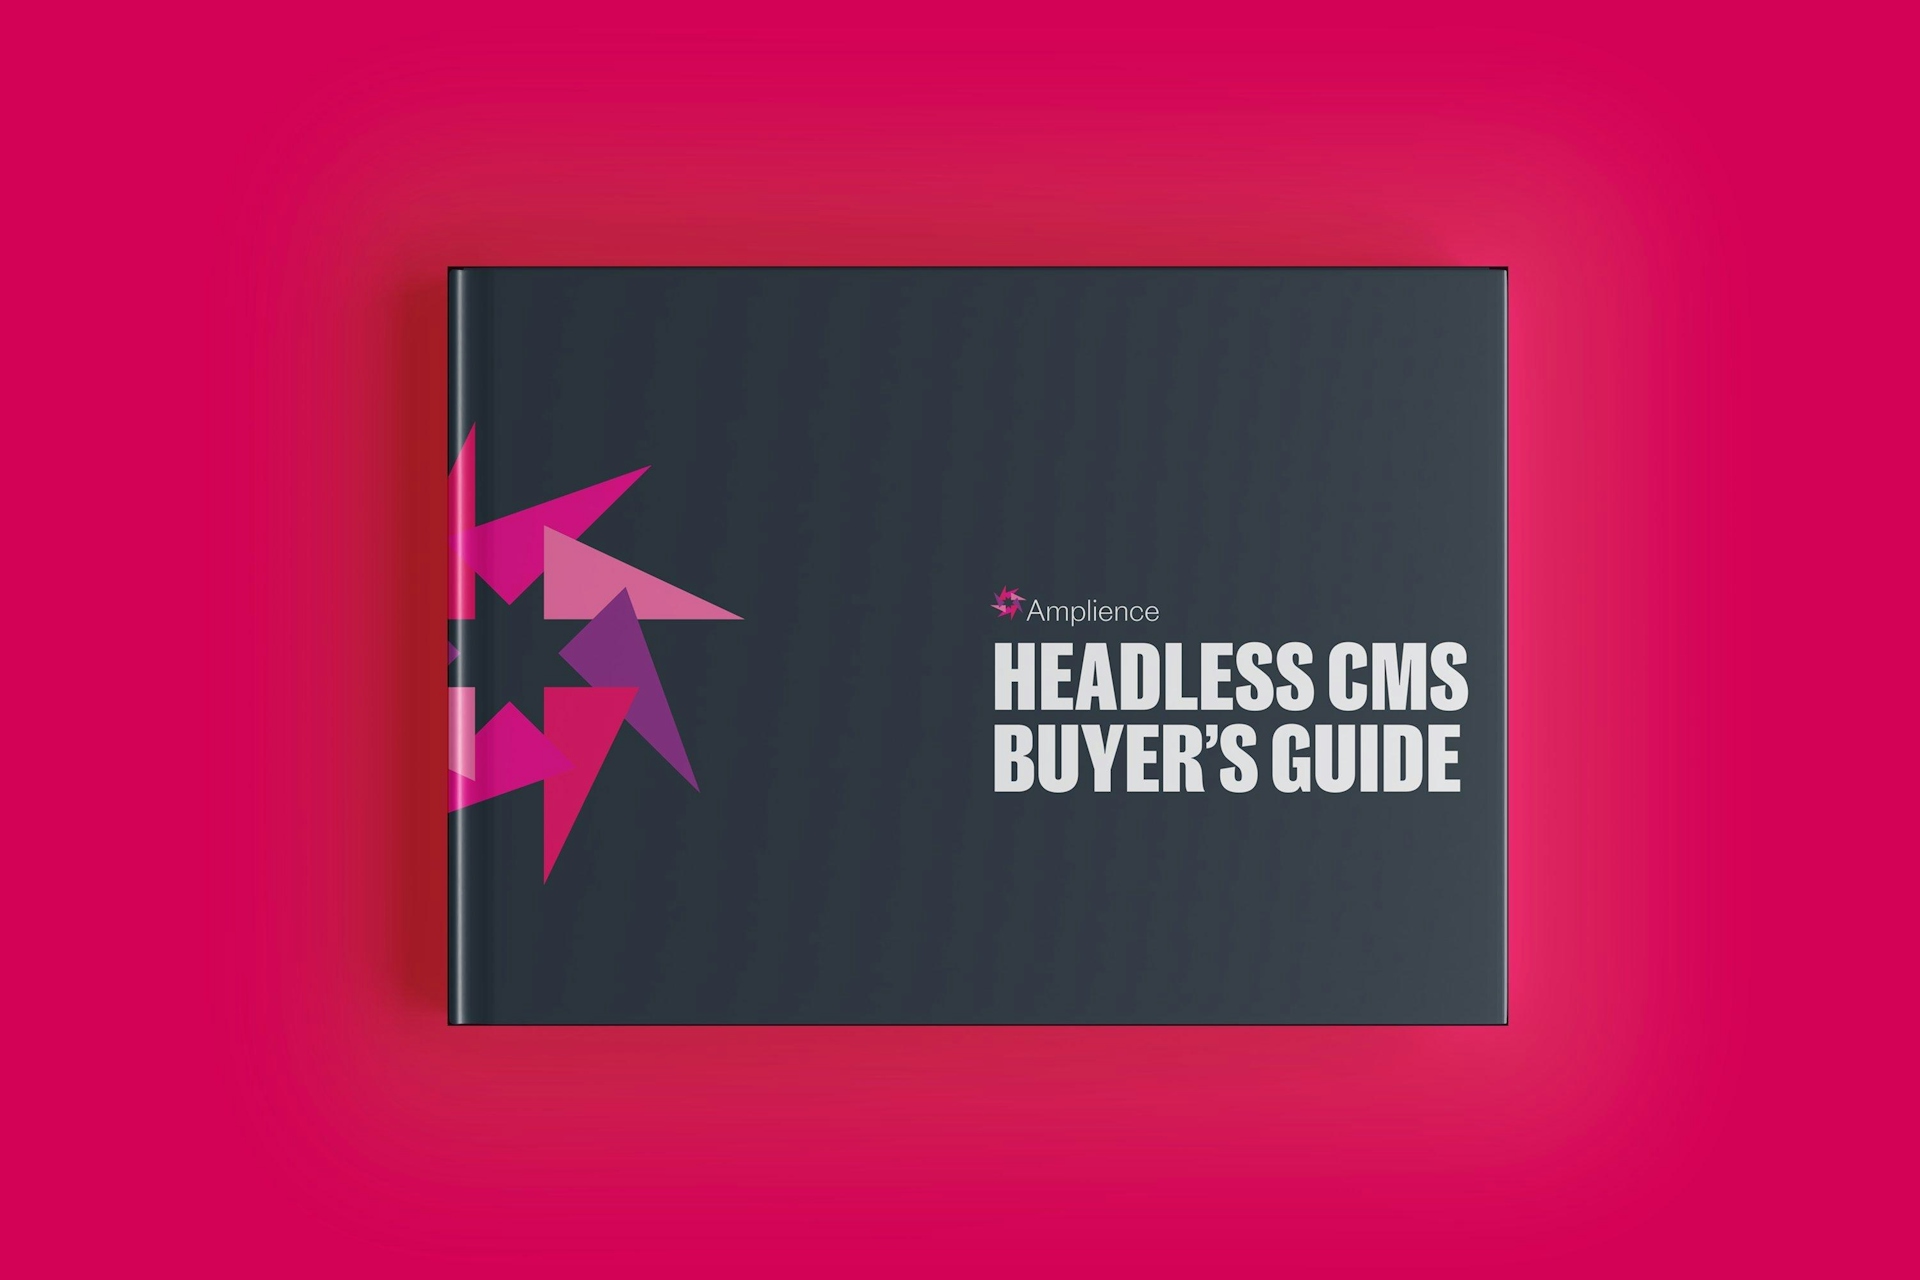 Overview: The Headless CMS Buyer's Guide